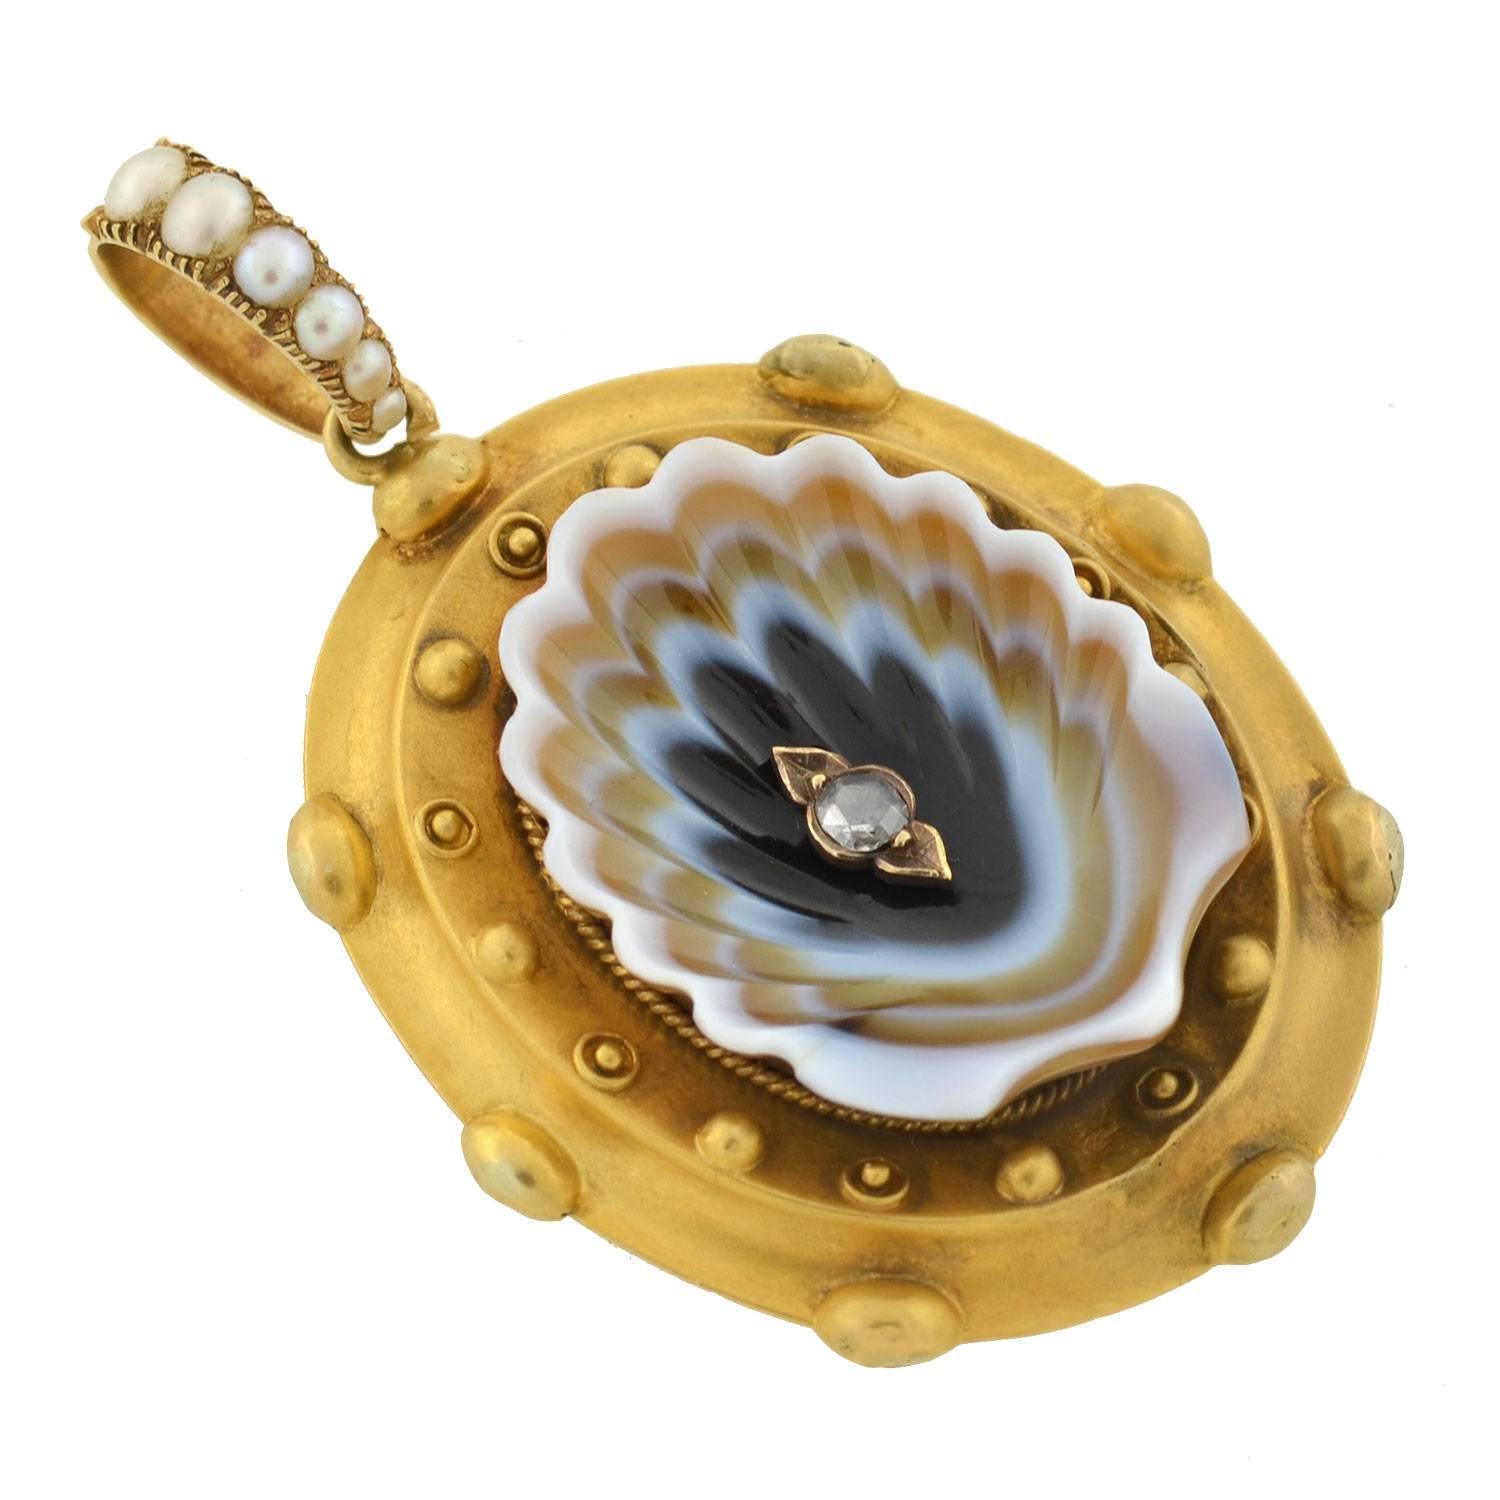 This extraordinary locket from the Victorian era (ca1880) is truly one-of-a-kind! Made of vibrant 18kt yellow gold, the piece has a very unusual 3-dimensional design. Resting in the center is a concave piece of hand-carved banded agate, which forms